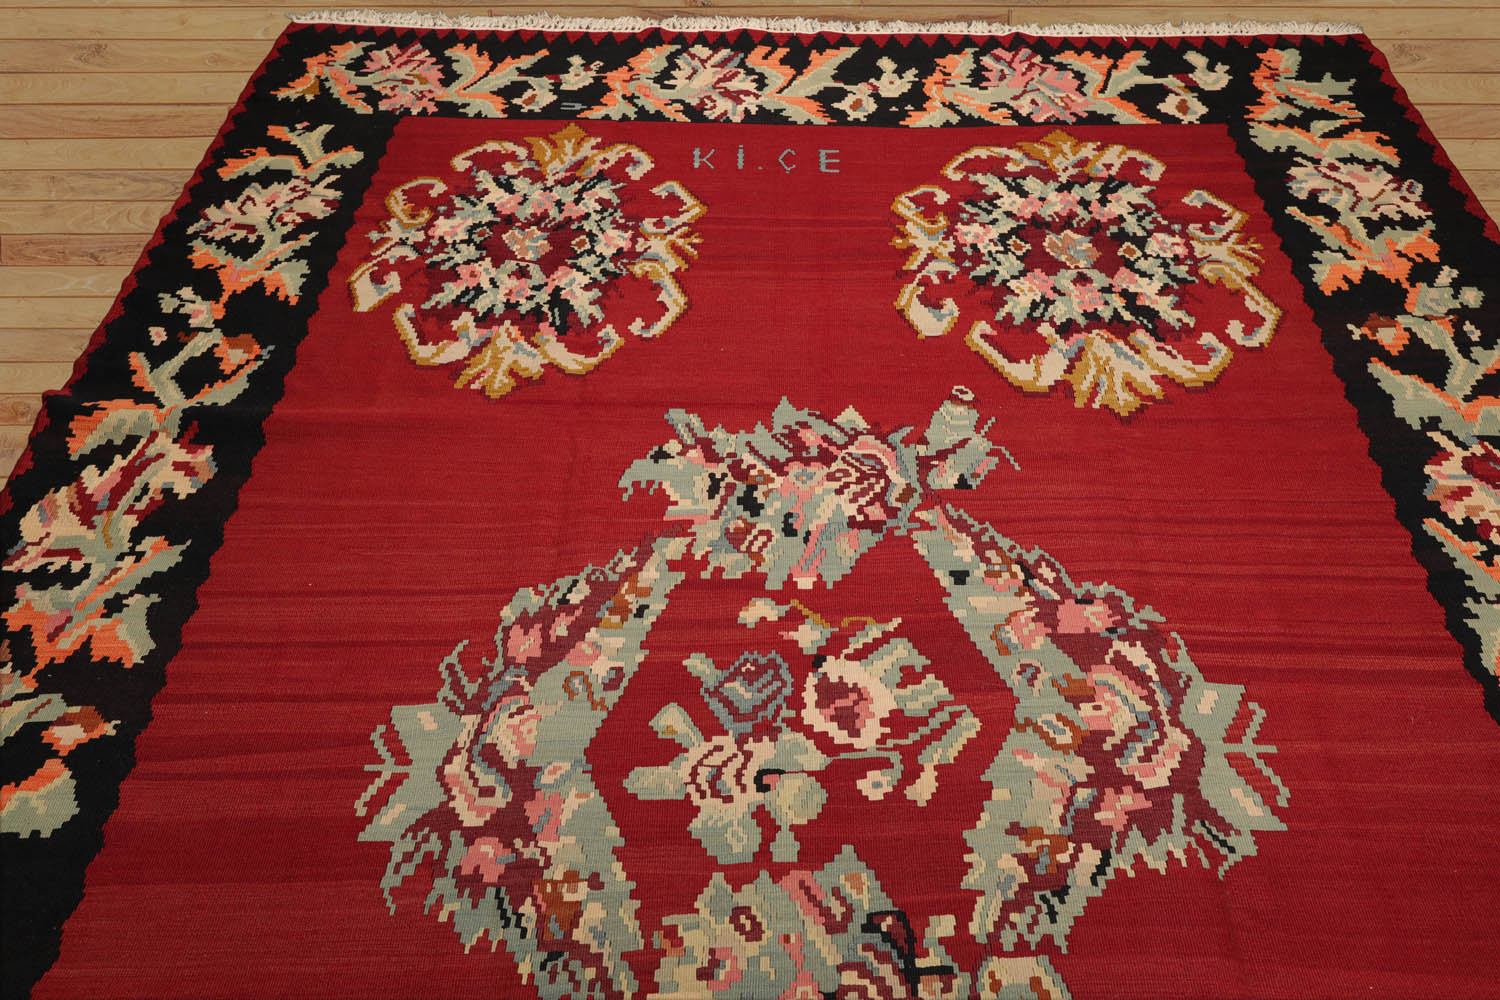 Emrah 9x12 Hand-Woven Rusty Red Traditional Southwestern Floral Wool Area Rug